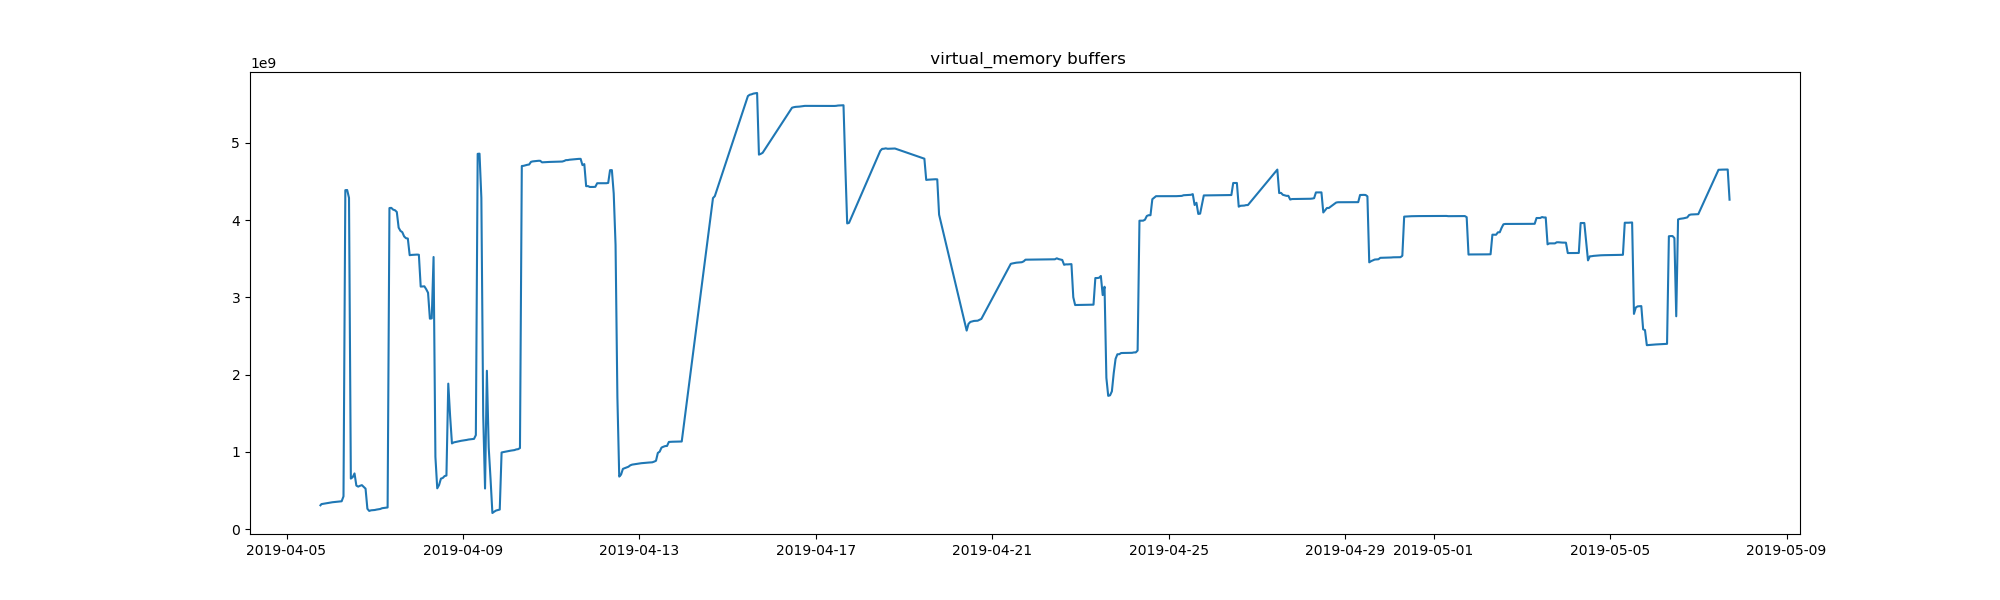 task-memory-virtual_memory-total-available-percent-used-free-active-inactive-buffers.png